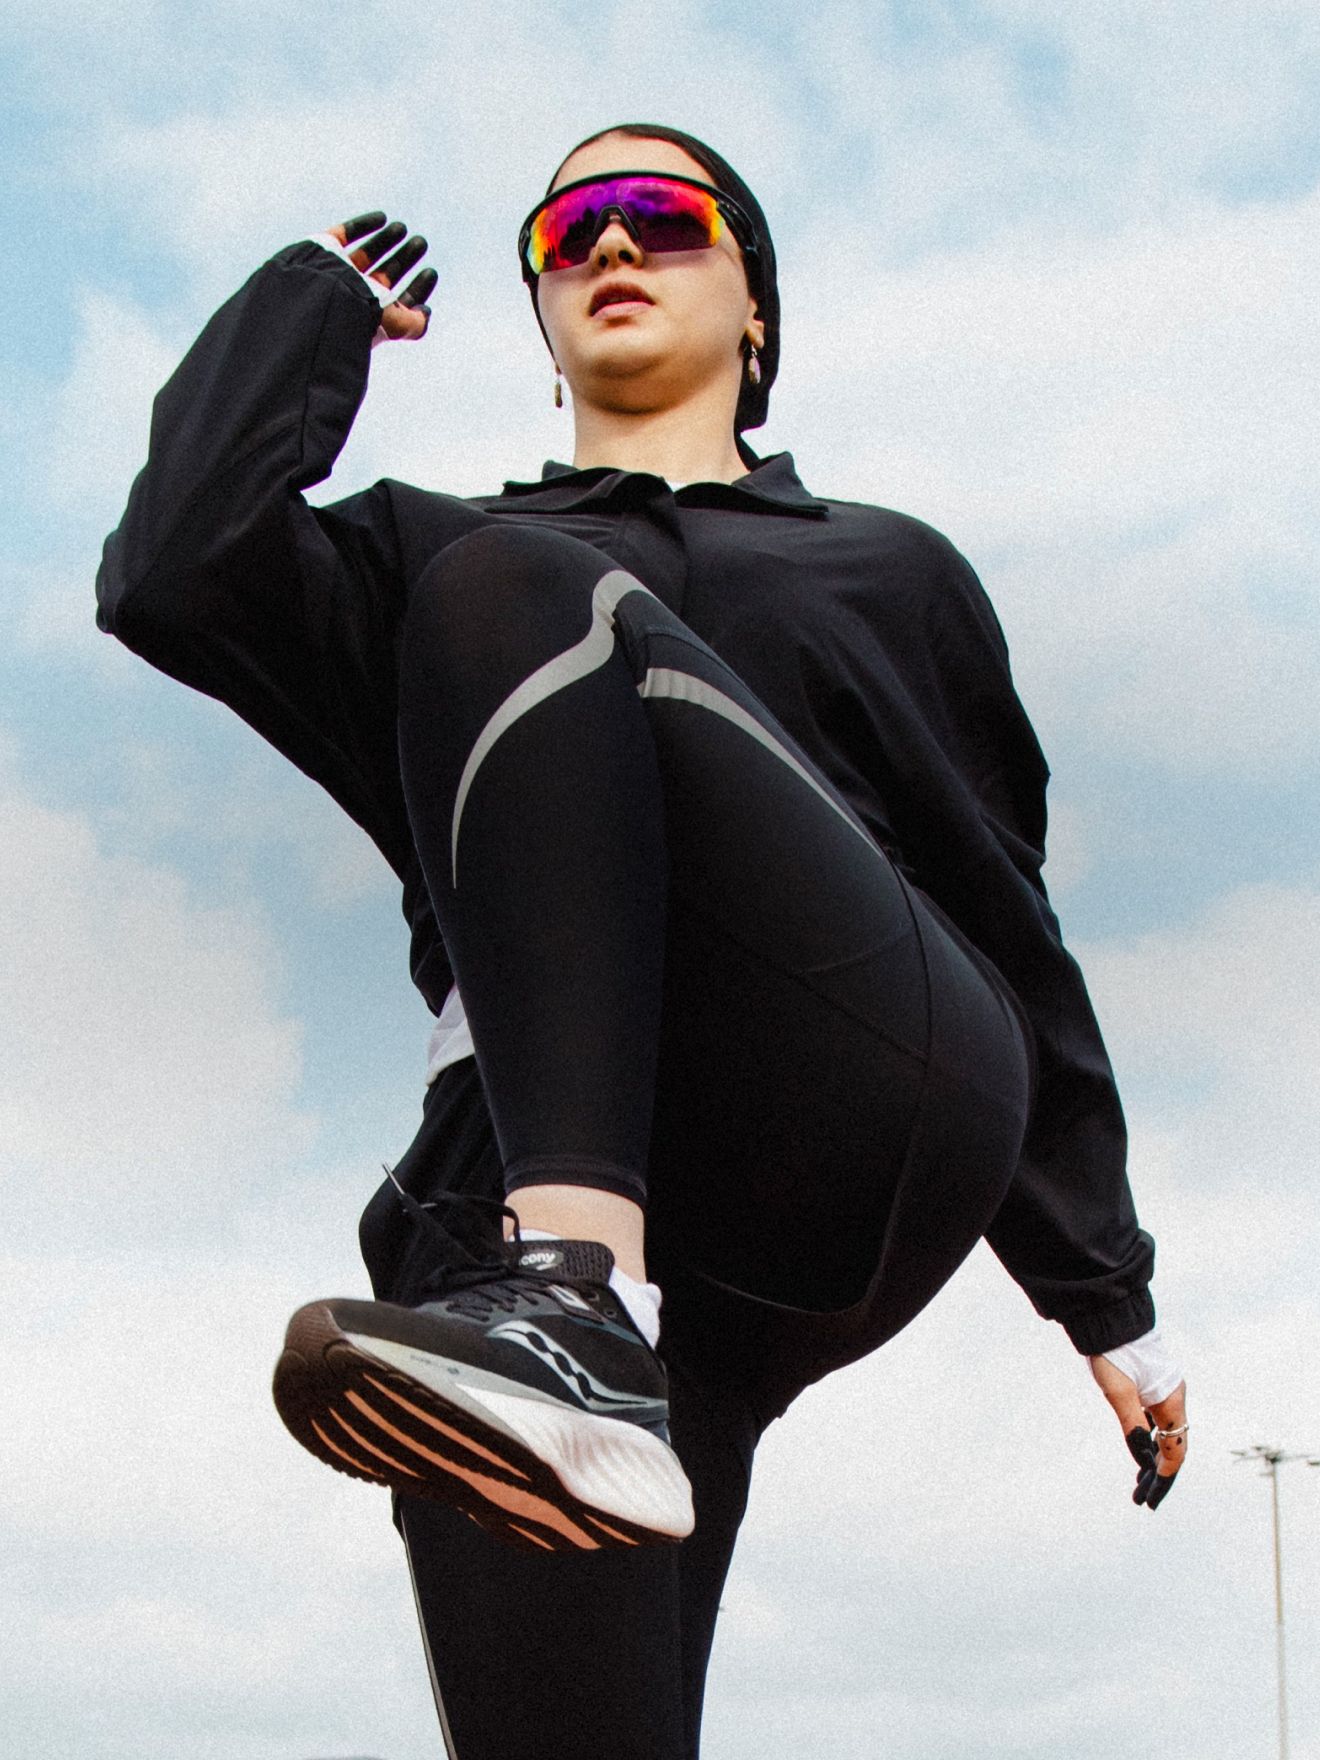 a person in black outfit and sunglasses jumping in the air